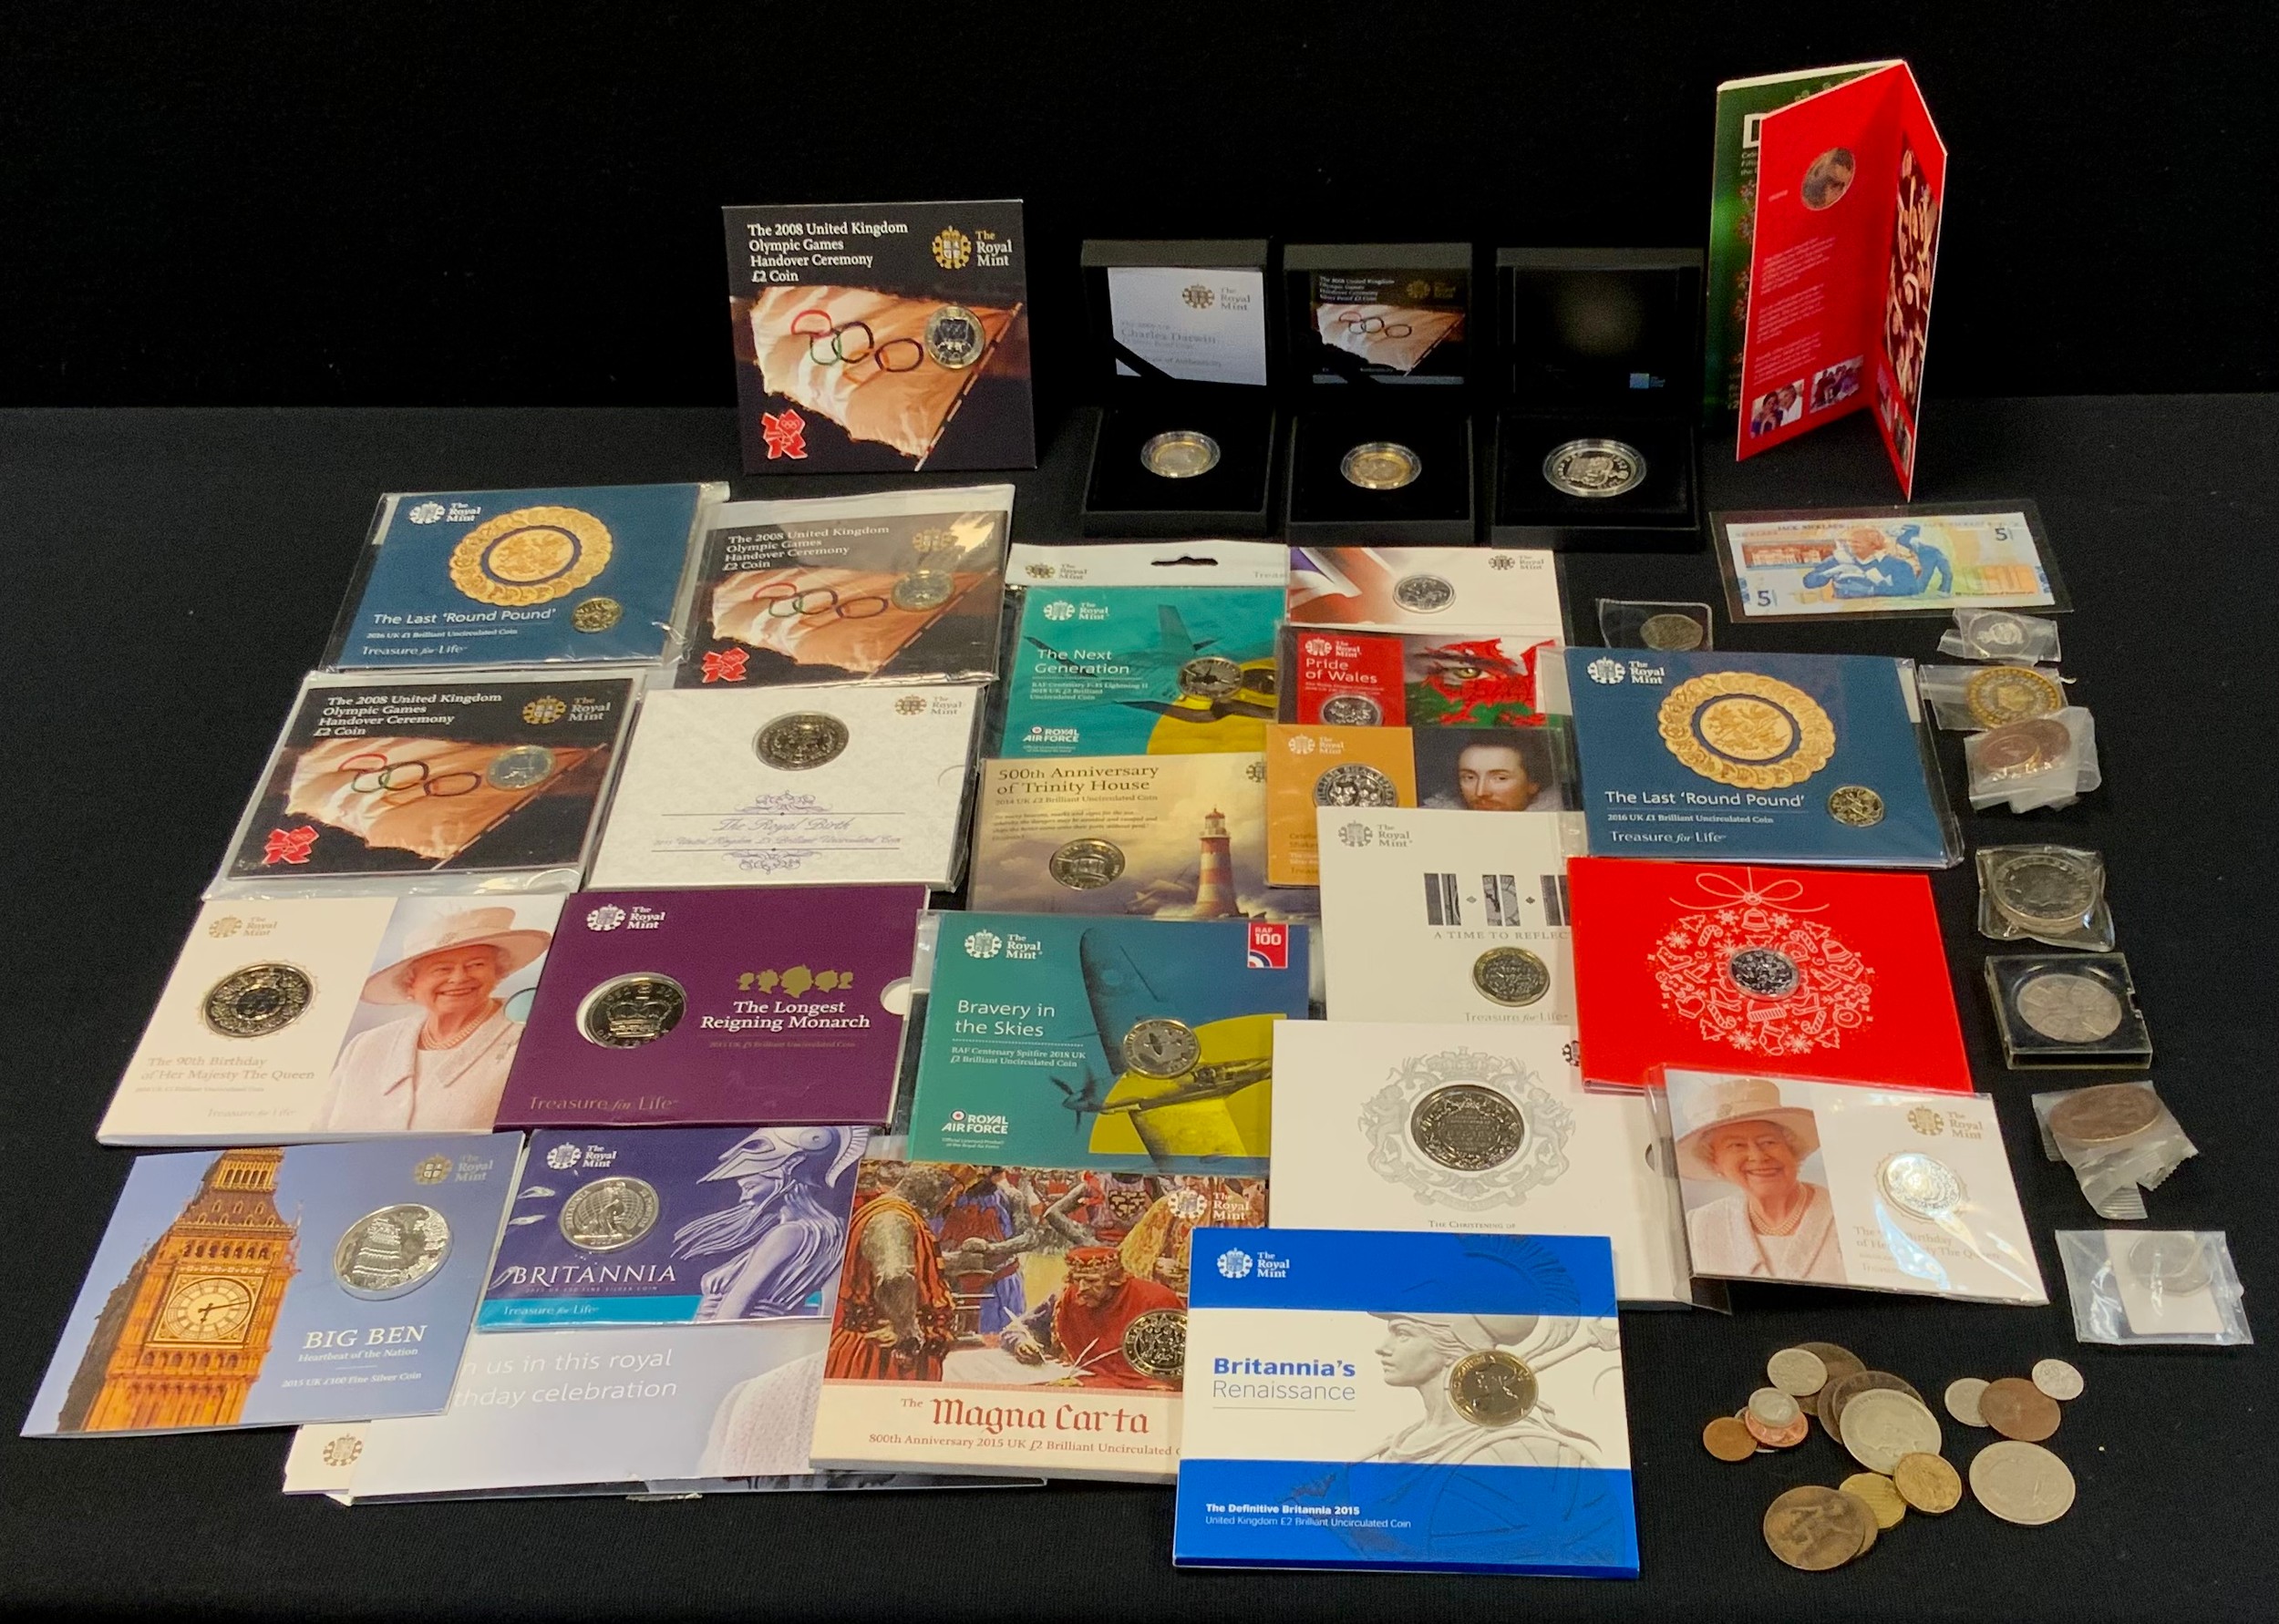 Coins - £20.00, £5.00, £2.00, £1.00, 50p, uncirculate d Royal Mint proofs, Pride of Wales, William